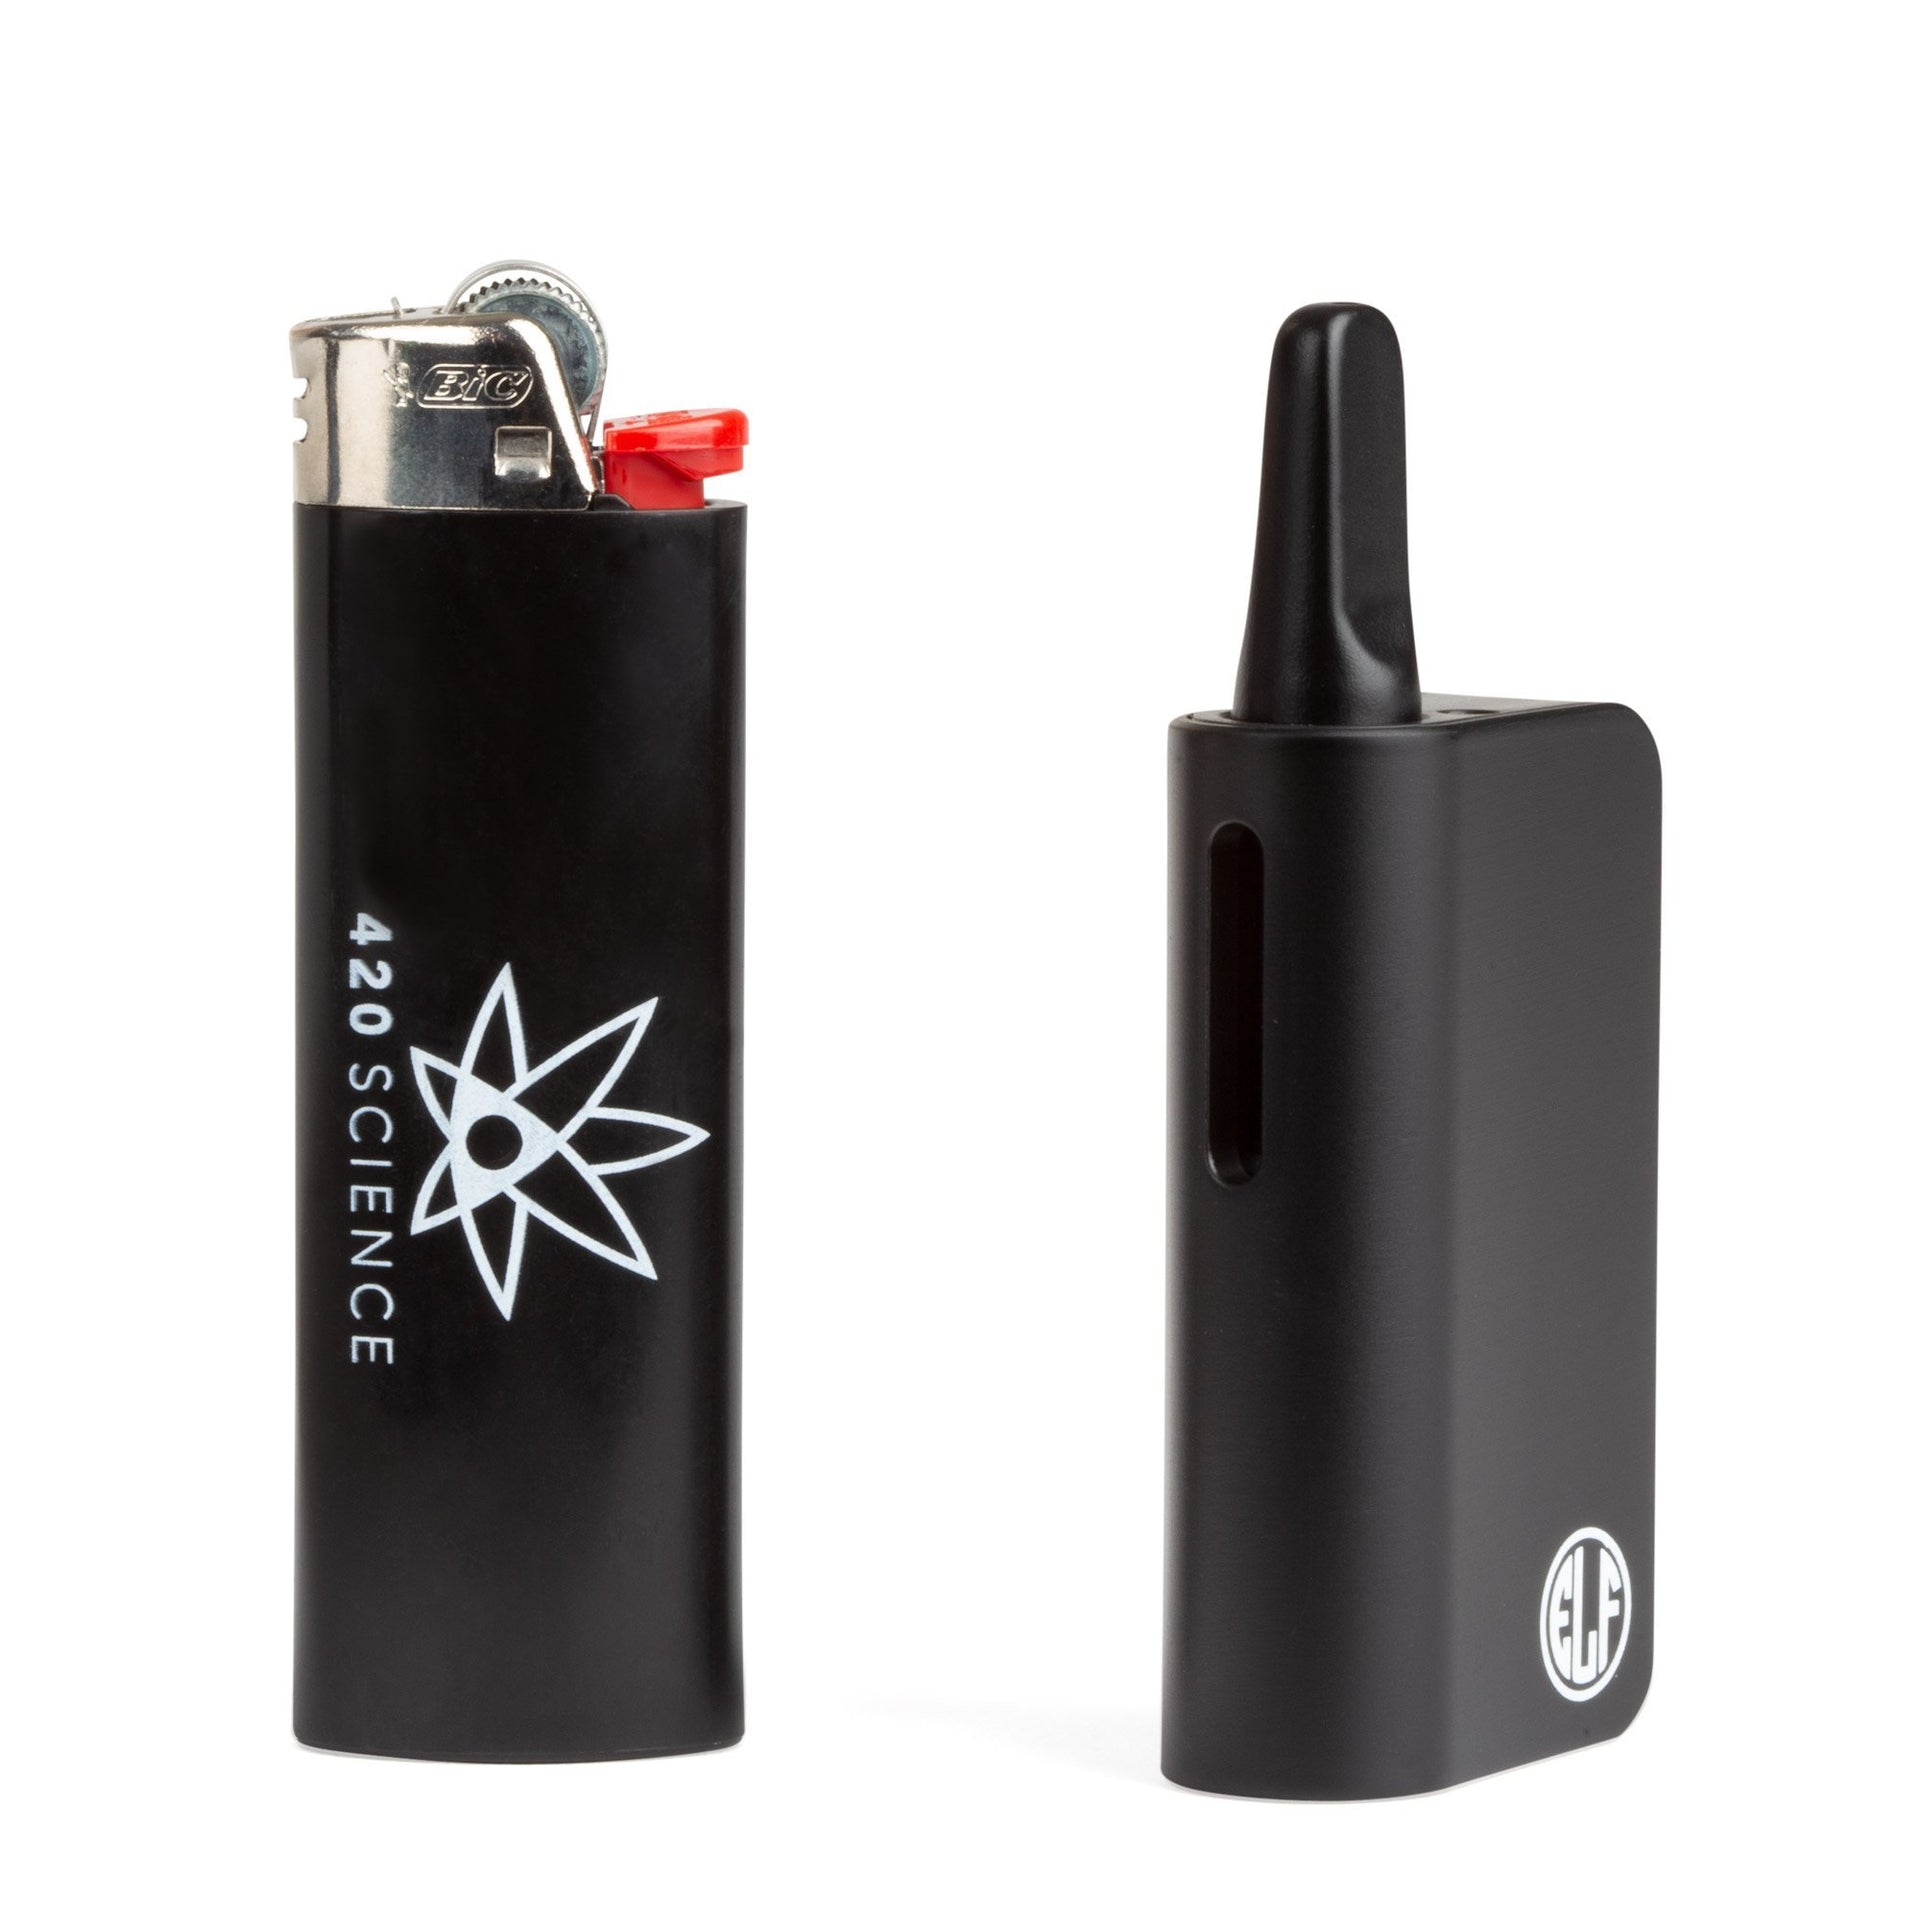 HoneyStick ELF Auto Draw Concealed Cartridge Vape Mod - 420 Science - The most trusted online smoke shop.